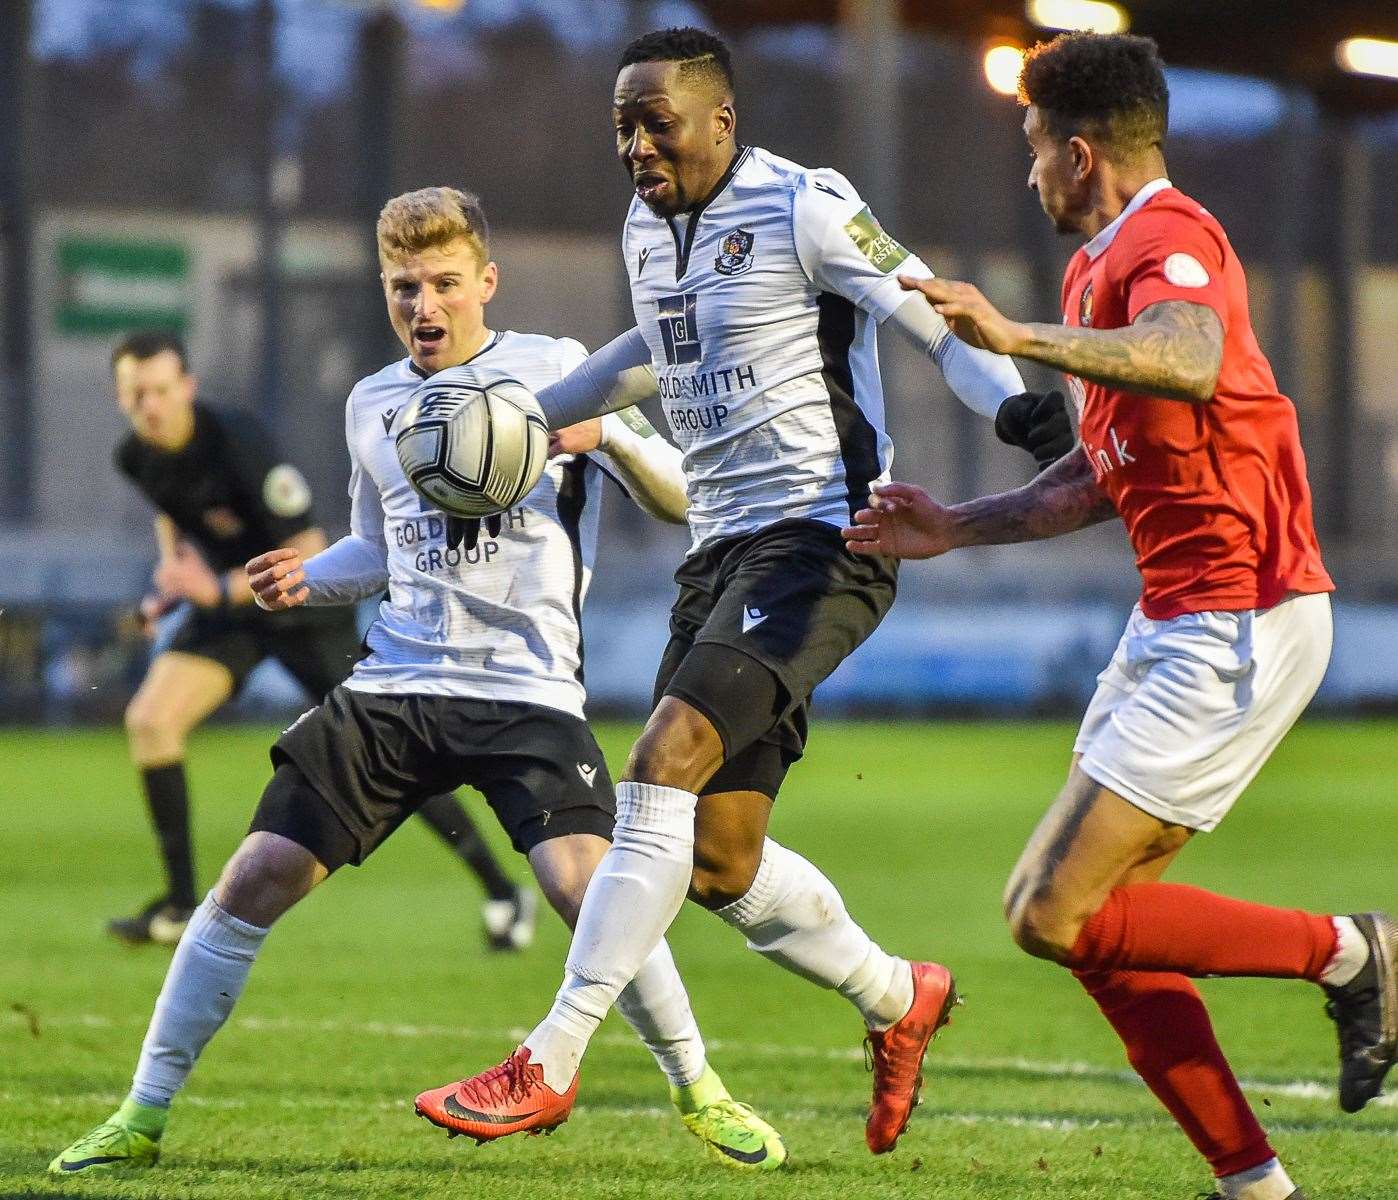 Dartford in action against Ebbsfleet United earlier this season in National League South. Picture: Dave Budden